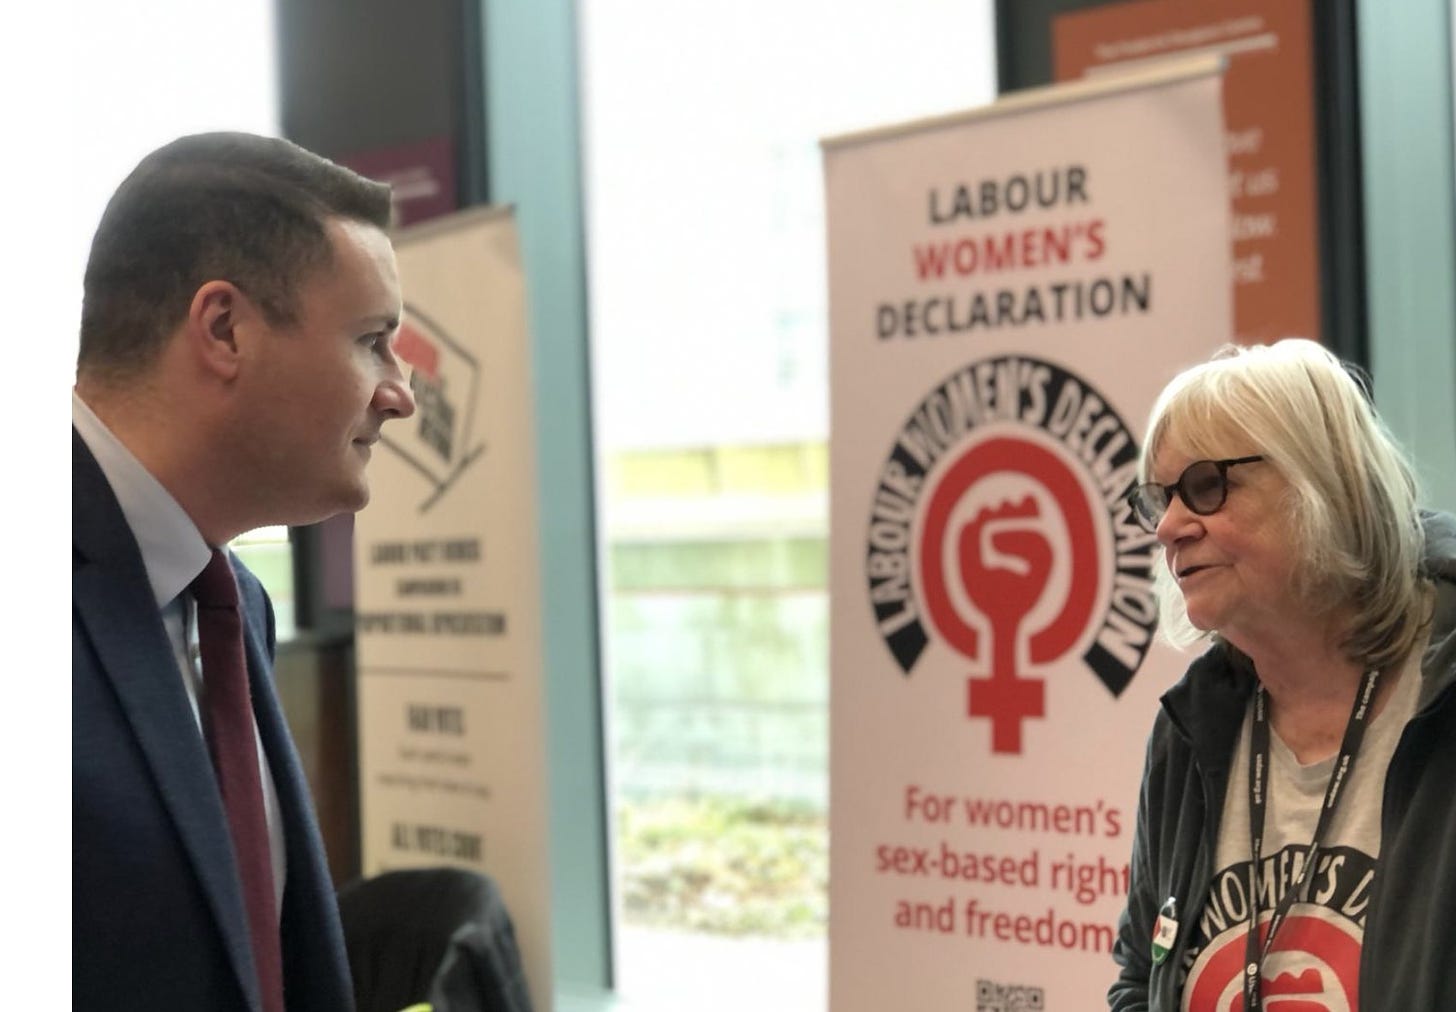 Wes Streeting and a member of the Labour Women's Declaration